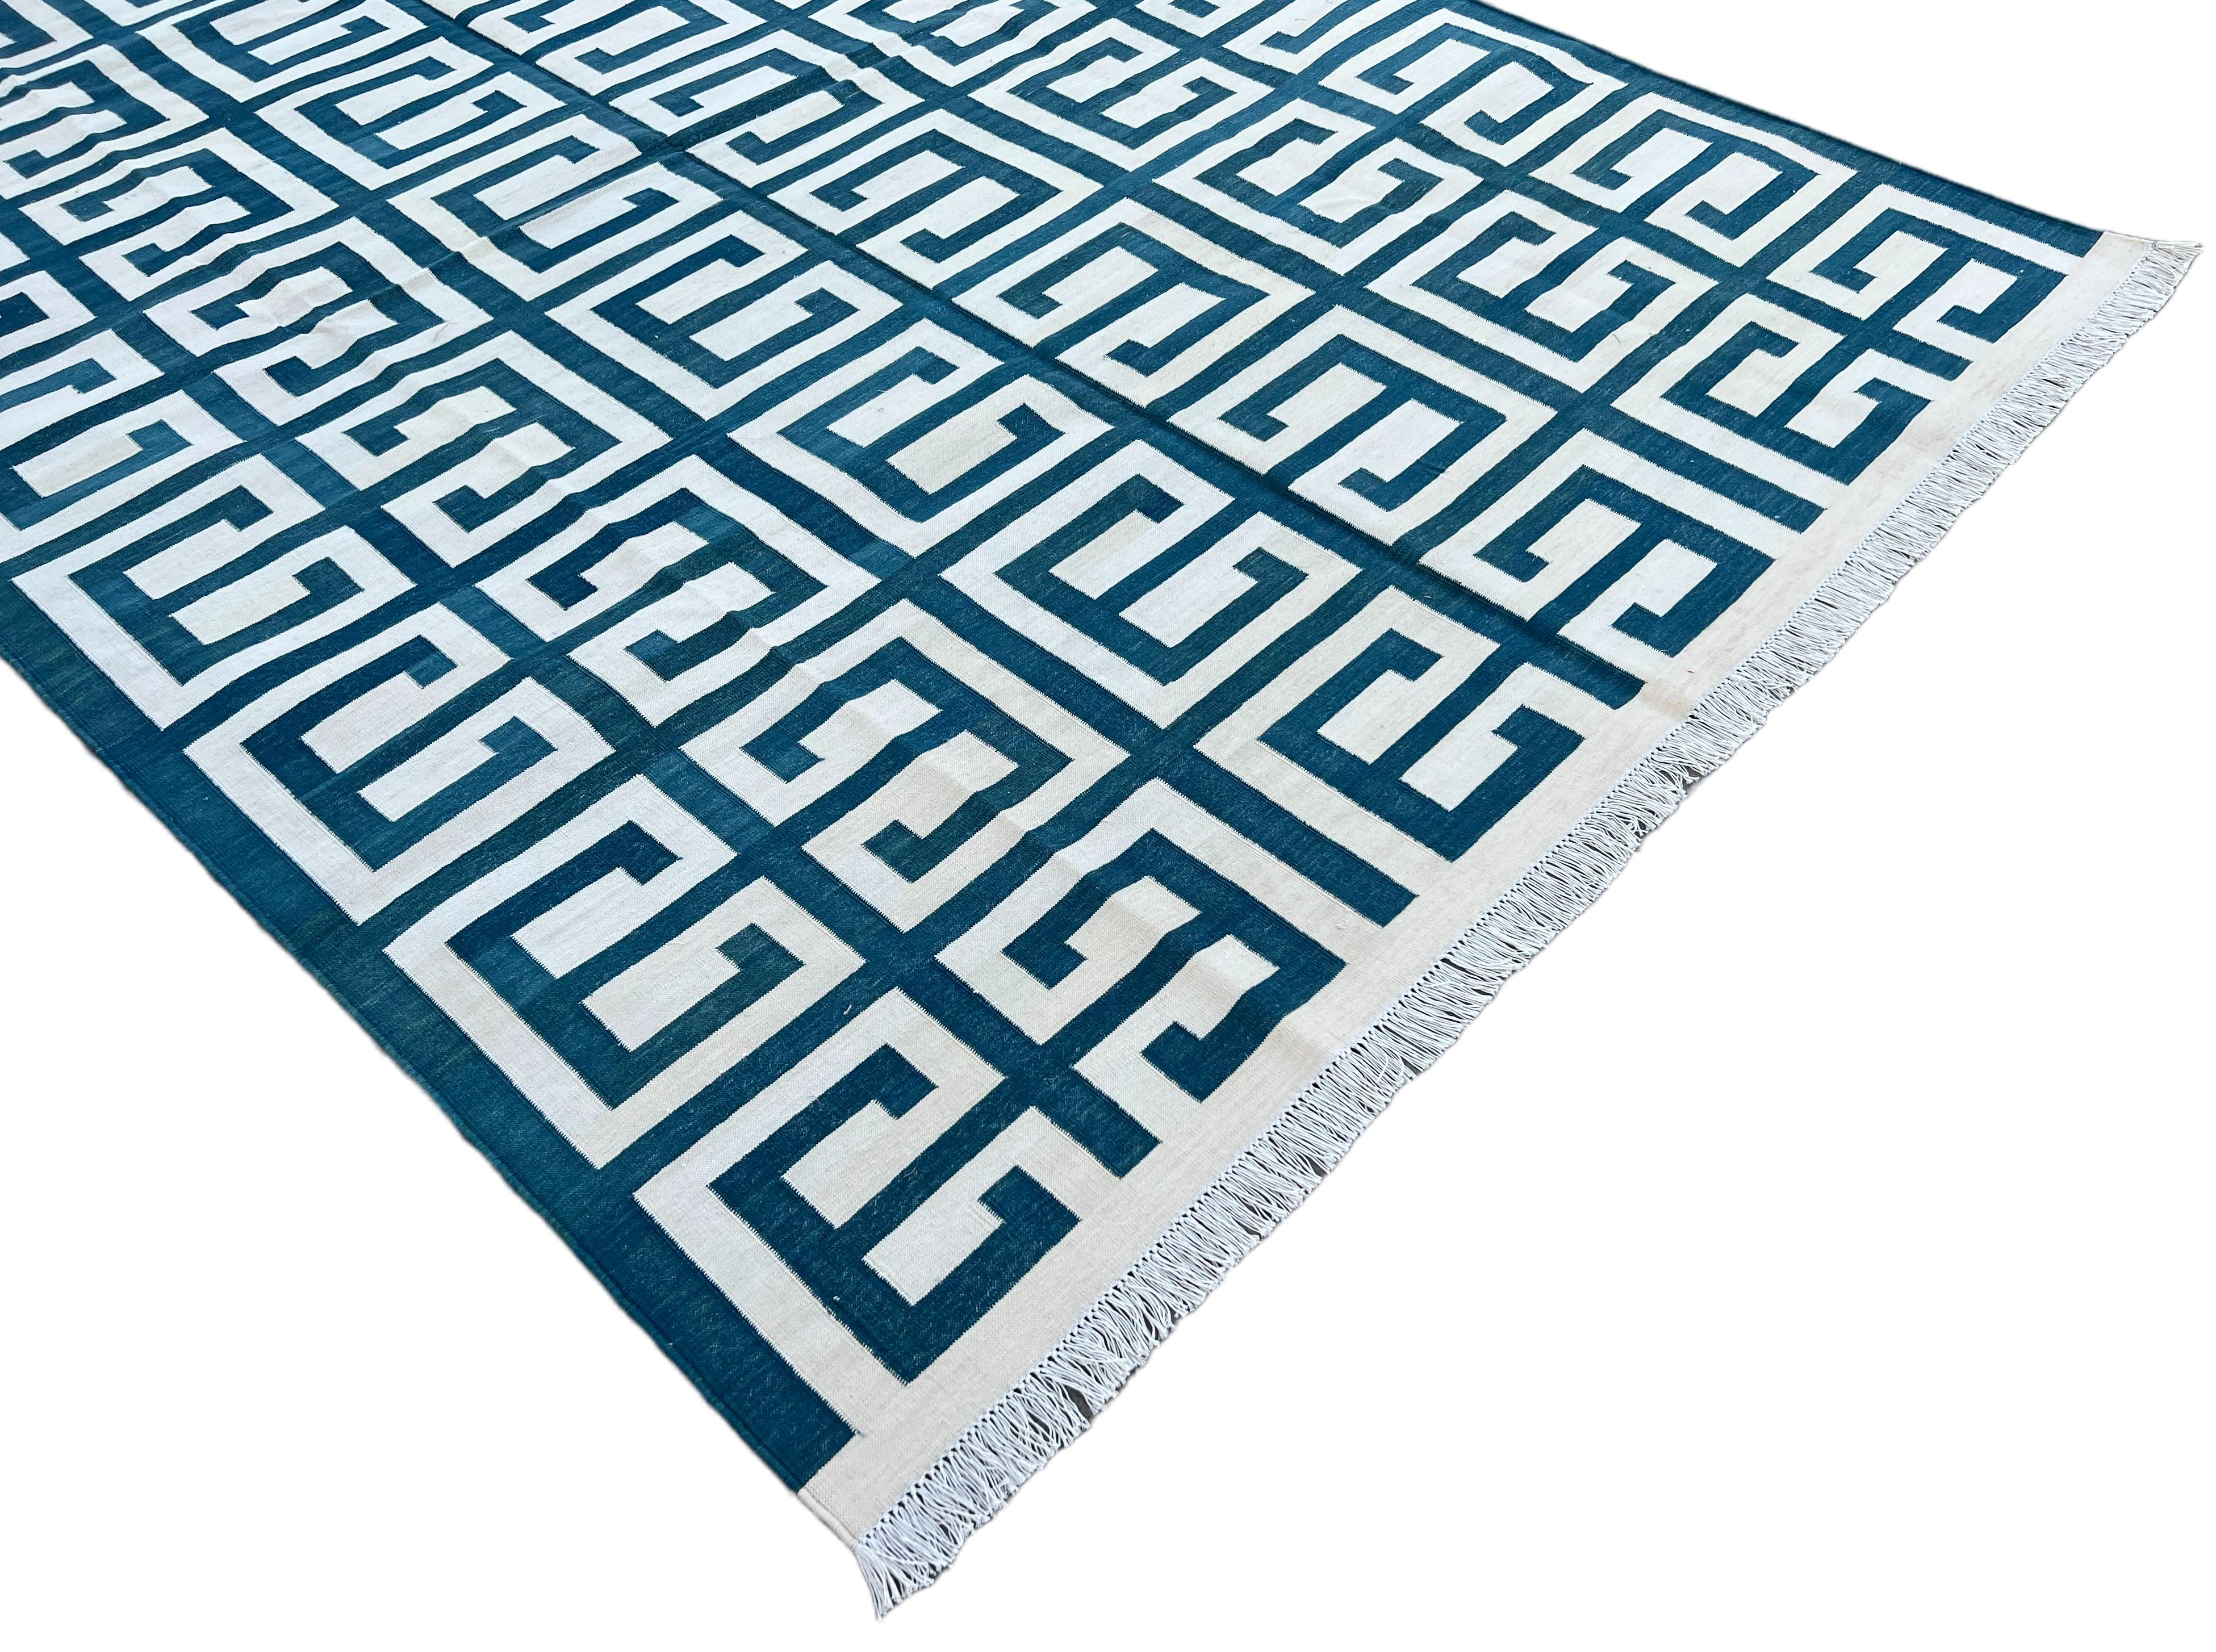 Contemporary Handmade Cotton Area Flat Weave Rug, Blue And White Geometric Indian Dhurrie Rug For Sale